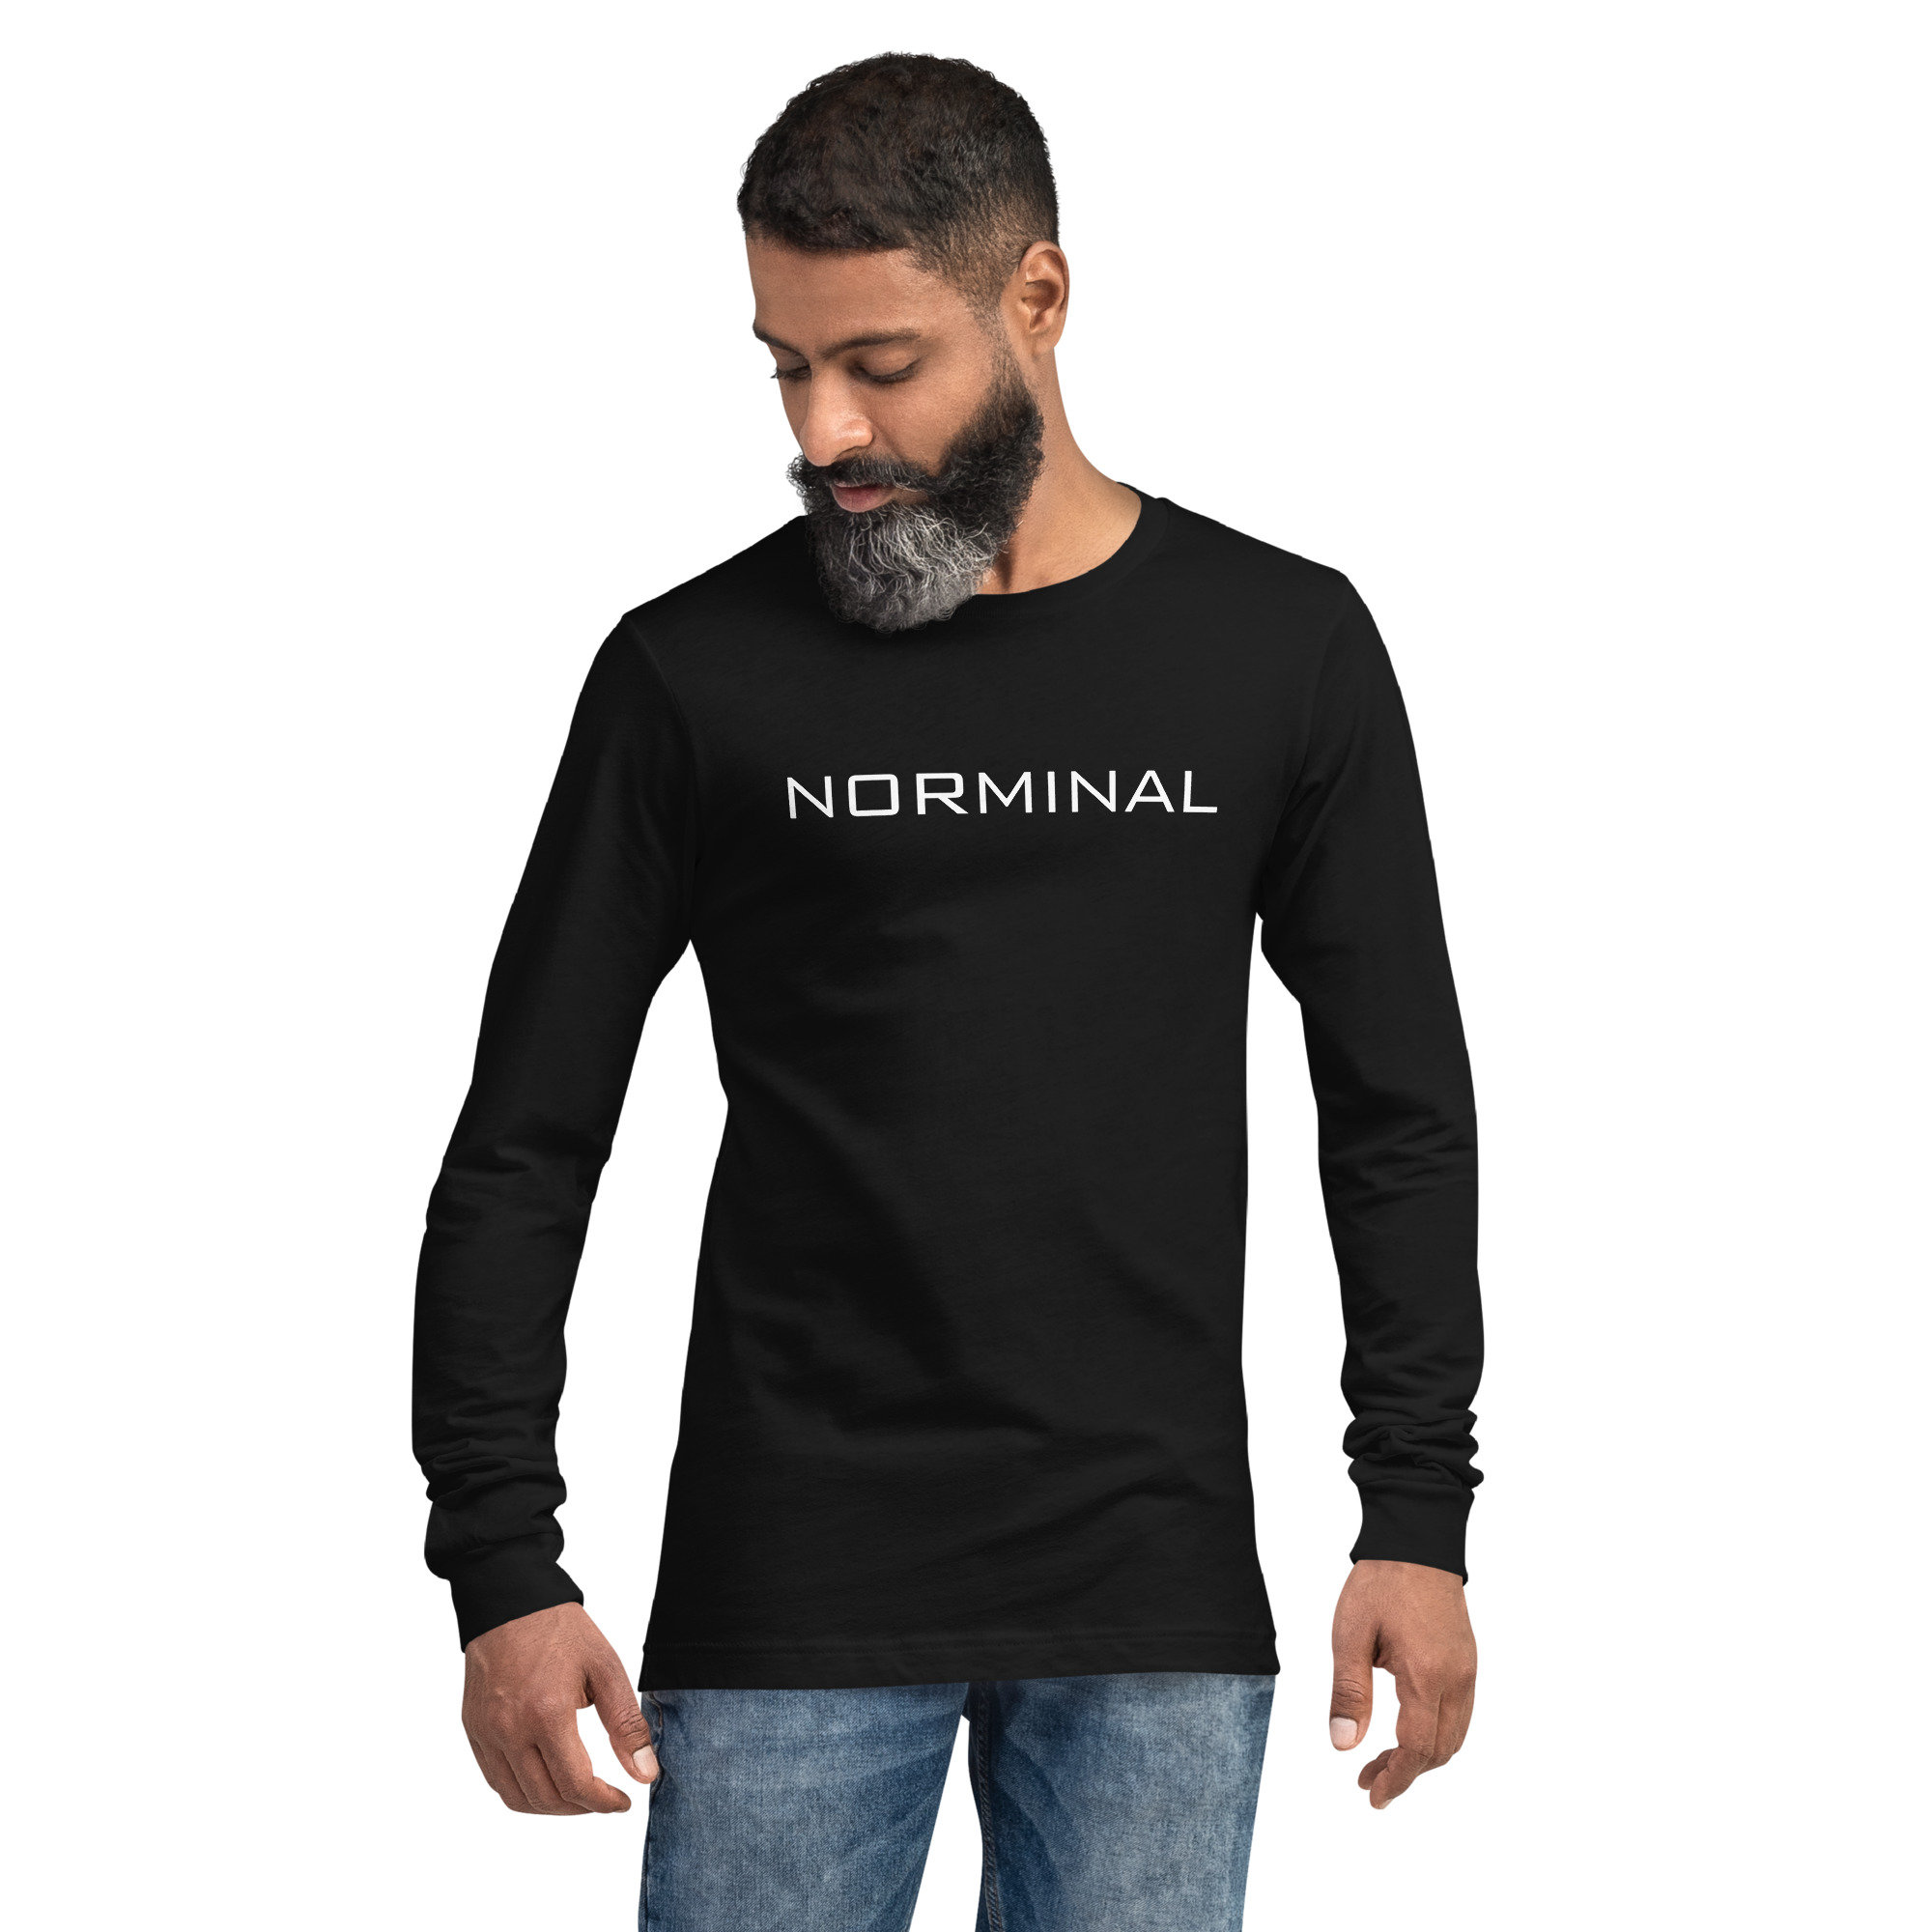 Norminal SpaceX Shirt - Space X Norminal Unisex Long Sleeve Tee - Nominally Norminal T-Shirt - SpaceX Shirt